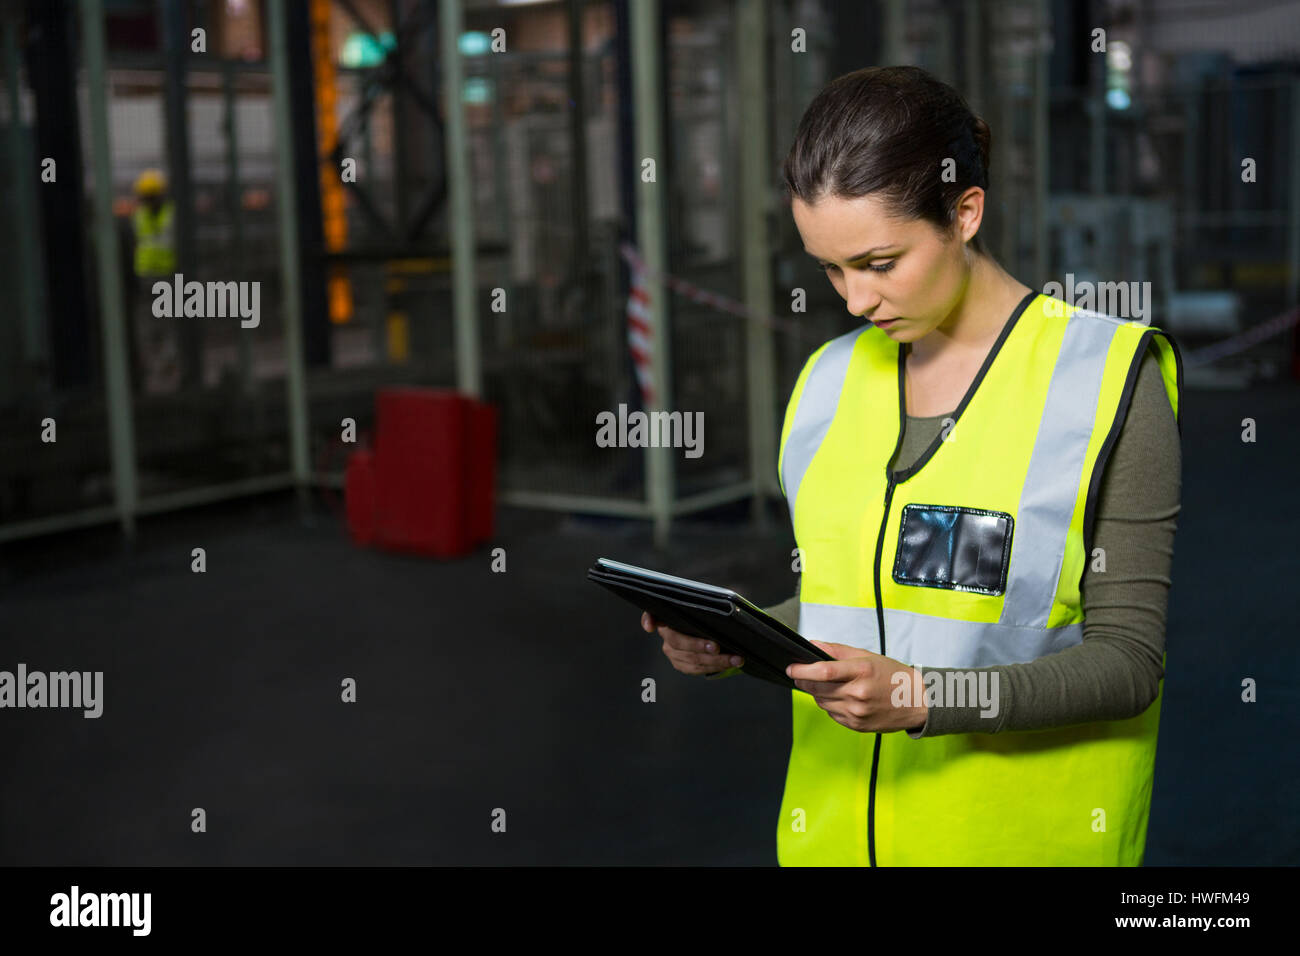 Confident female worker using tablet pc in warehouse Stock Photo